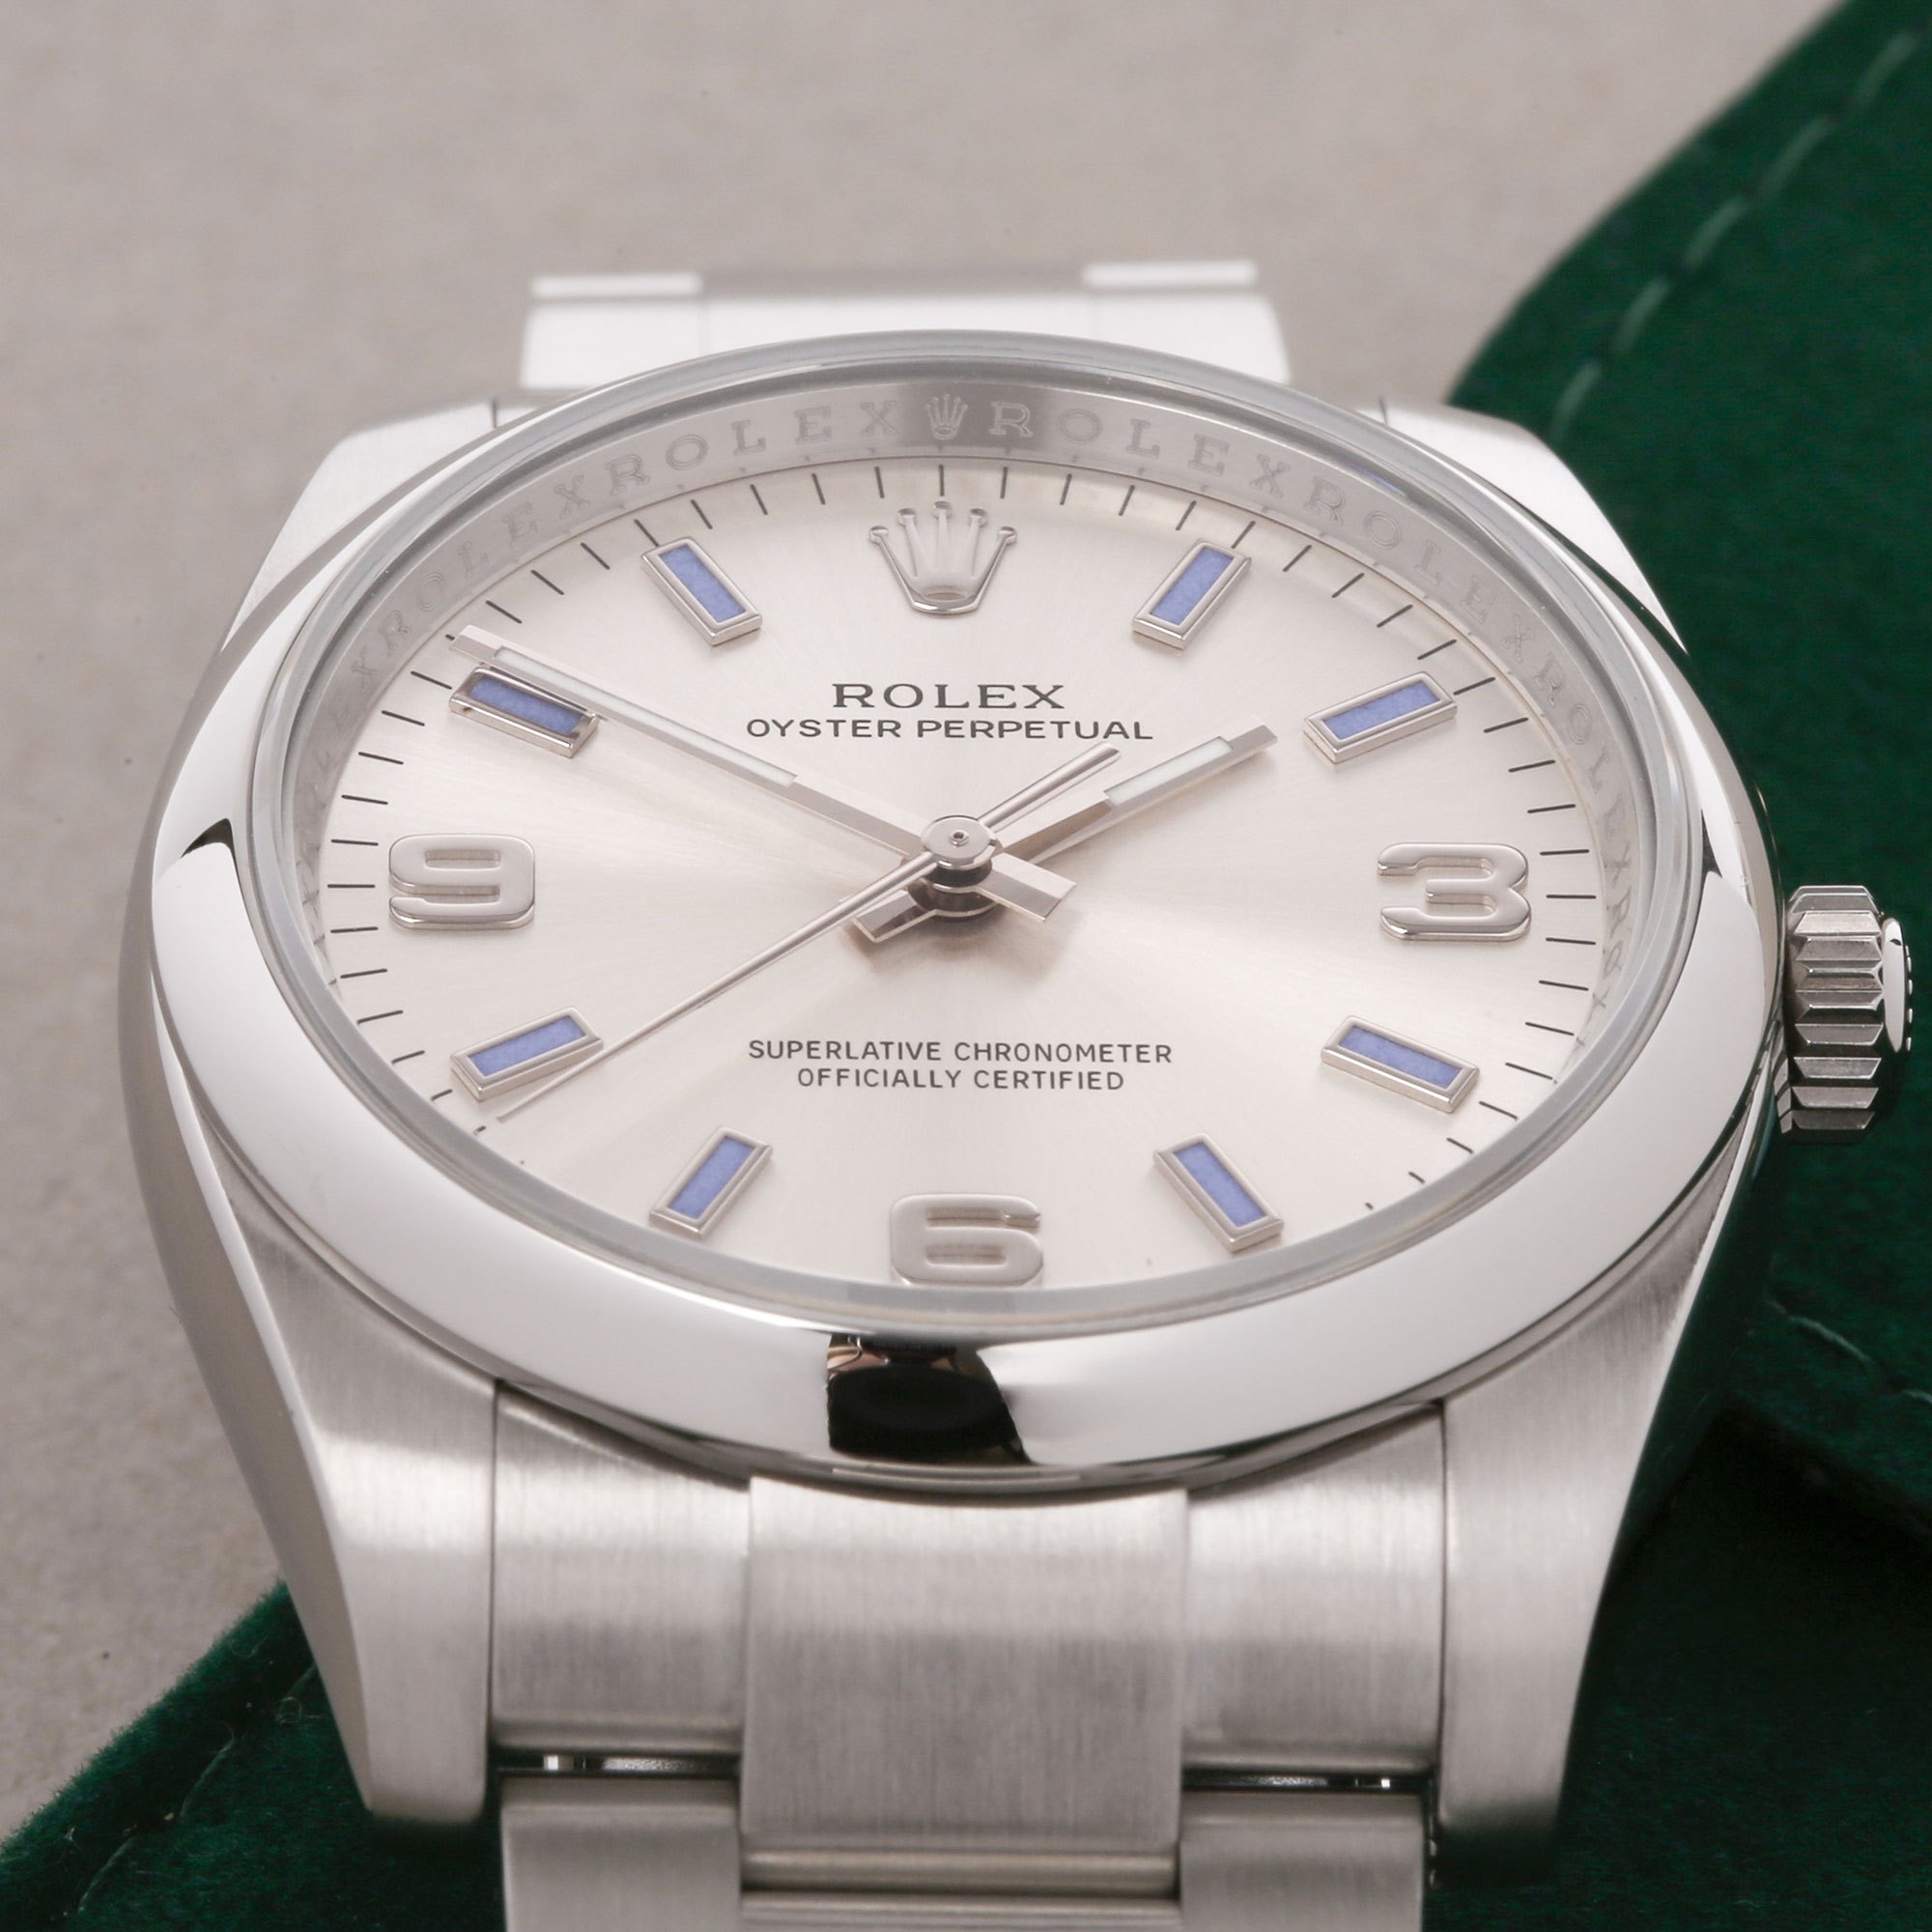 Rolex Oyster Perpetual 34 114200 Unisex Stainless Steel Watch - Image 3 of 11